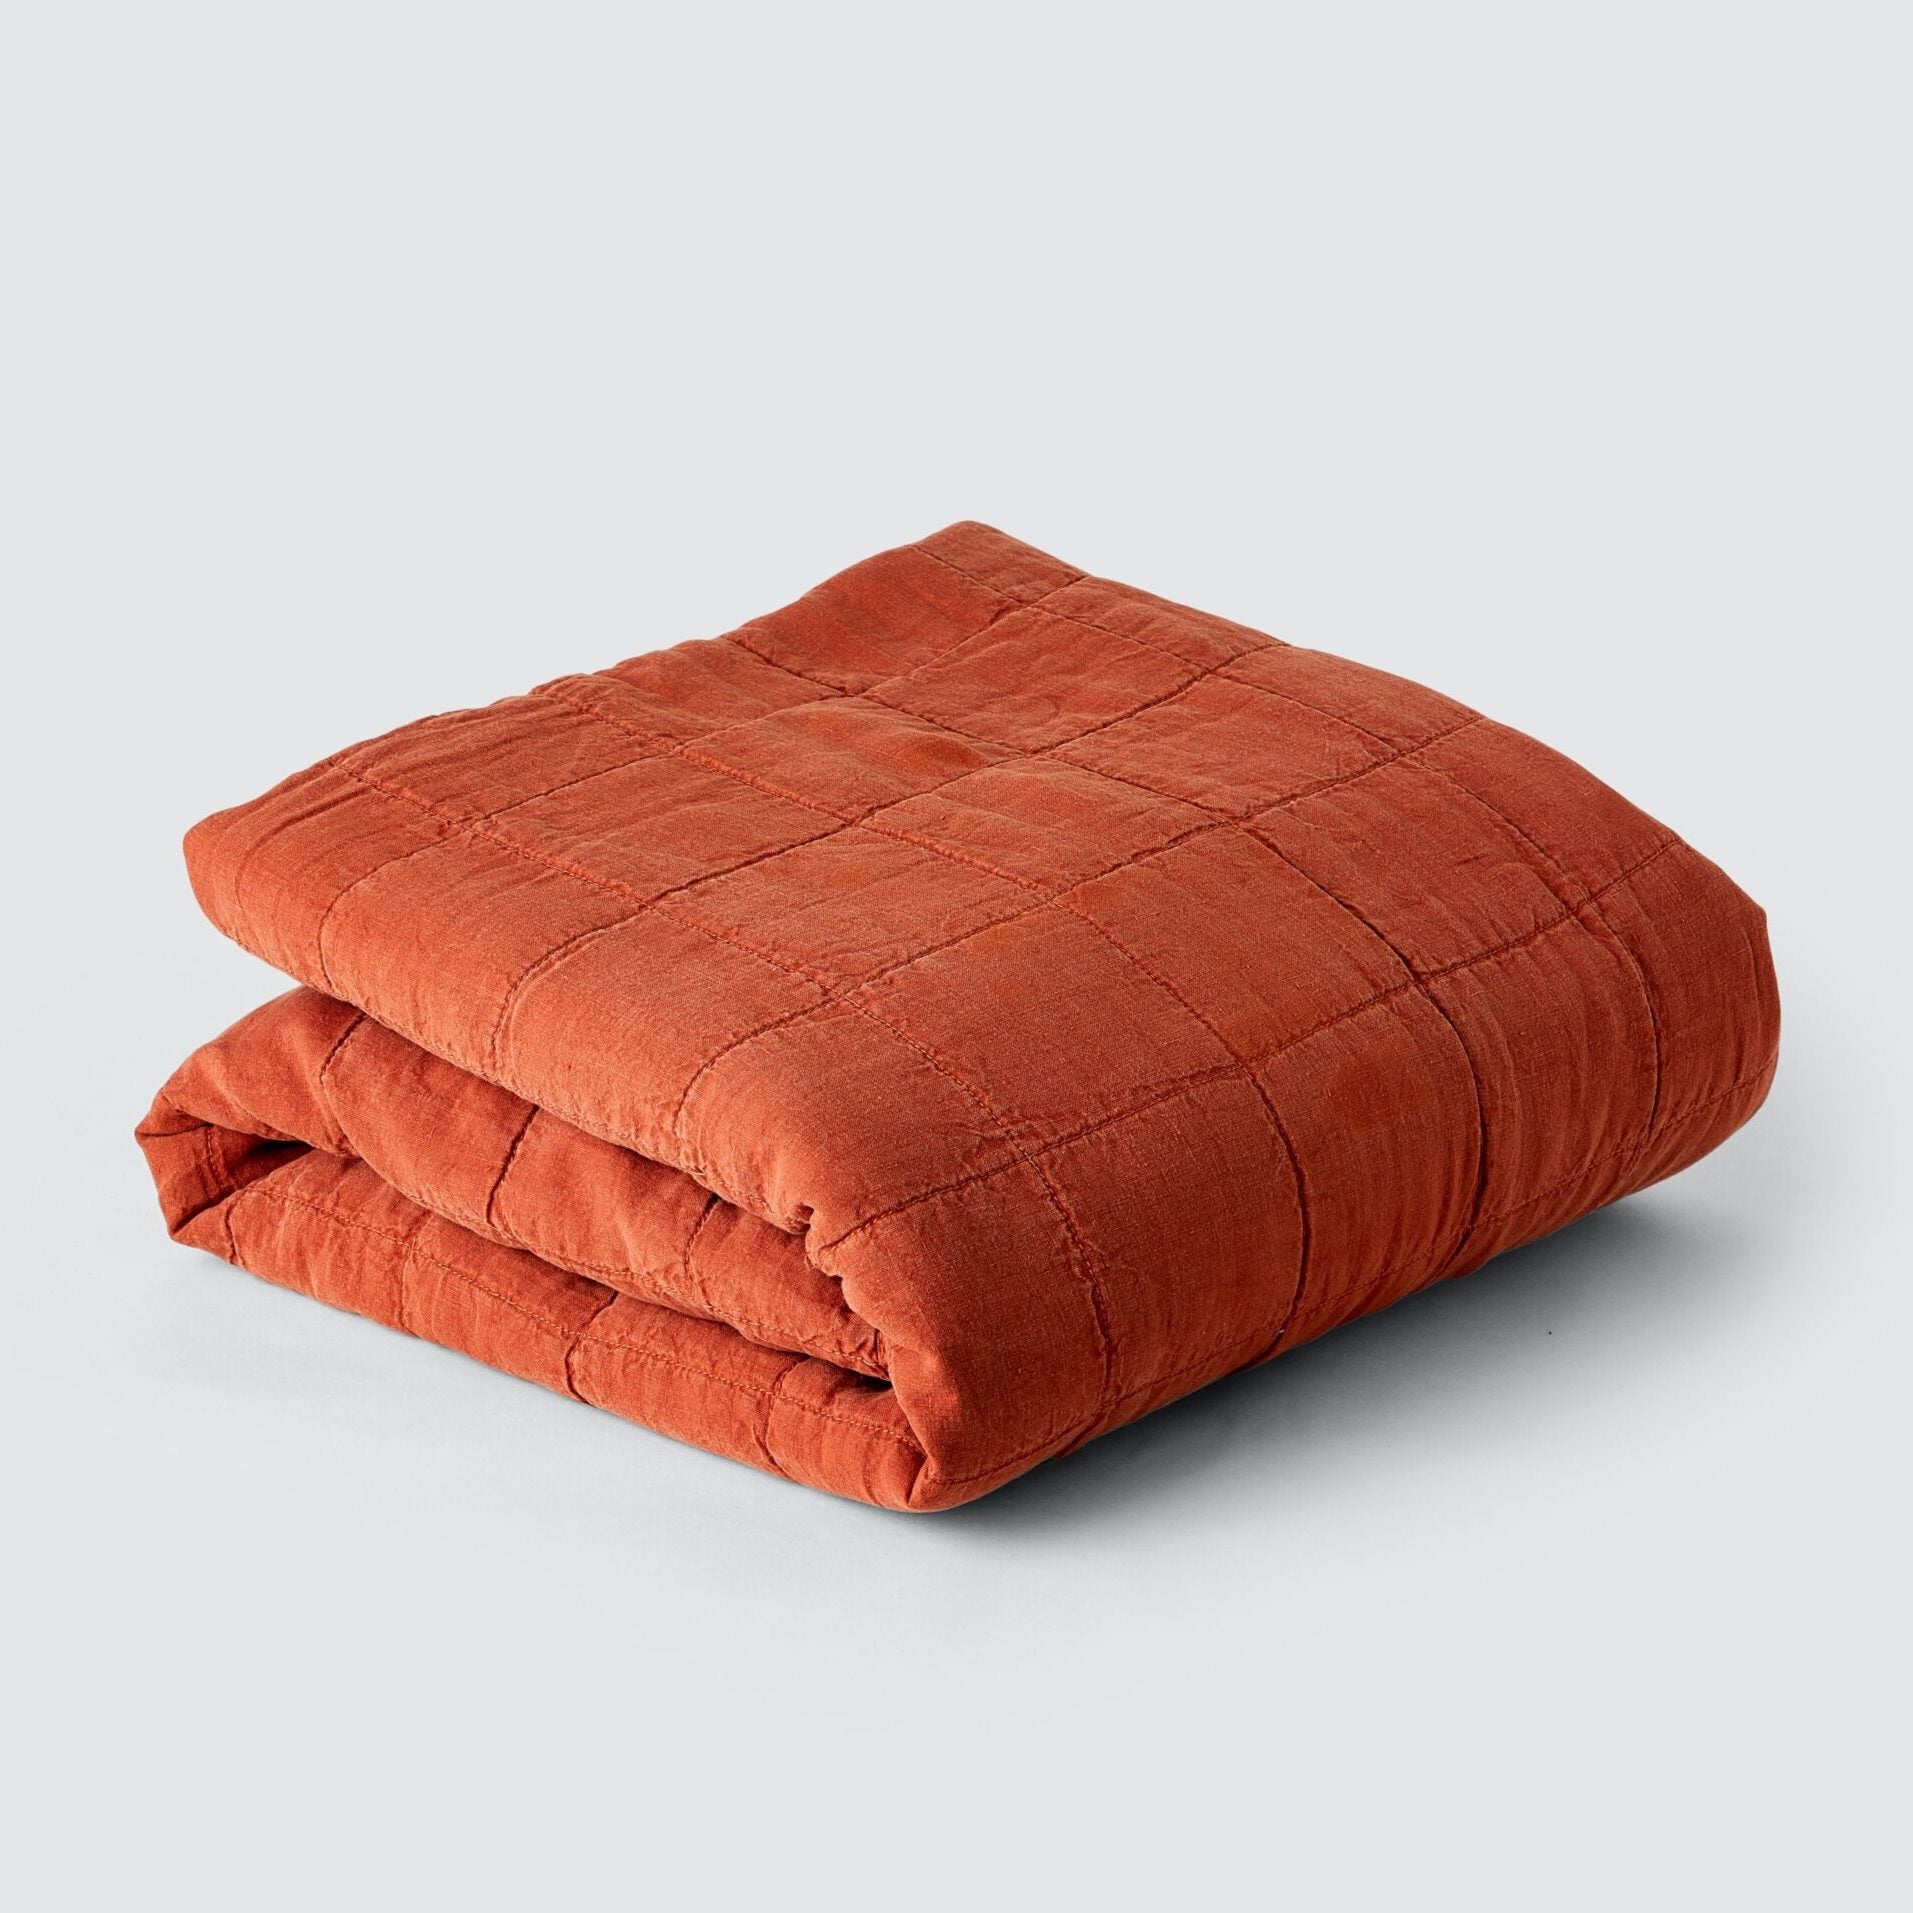 On-Sale Blankets, Just in Time for the New Season of Succession